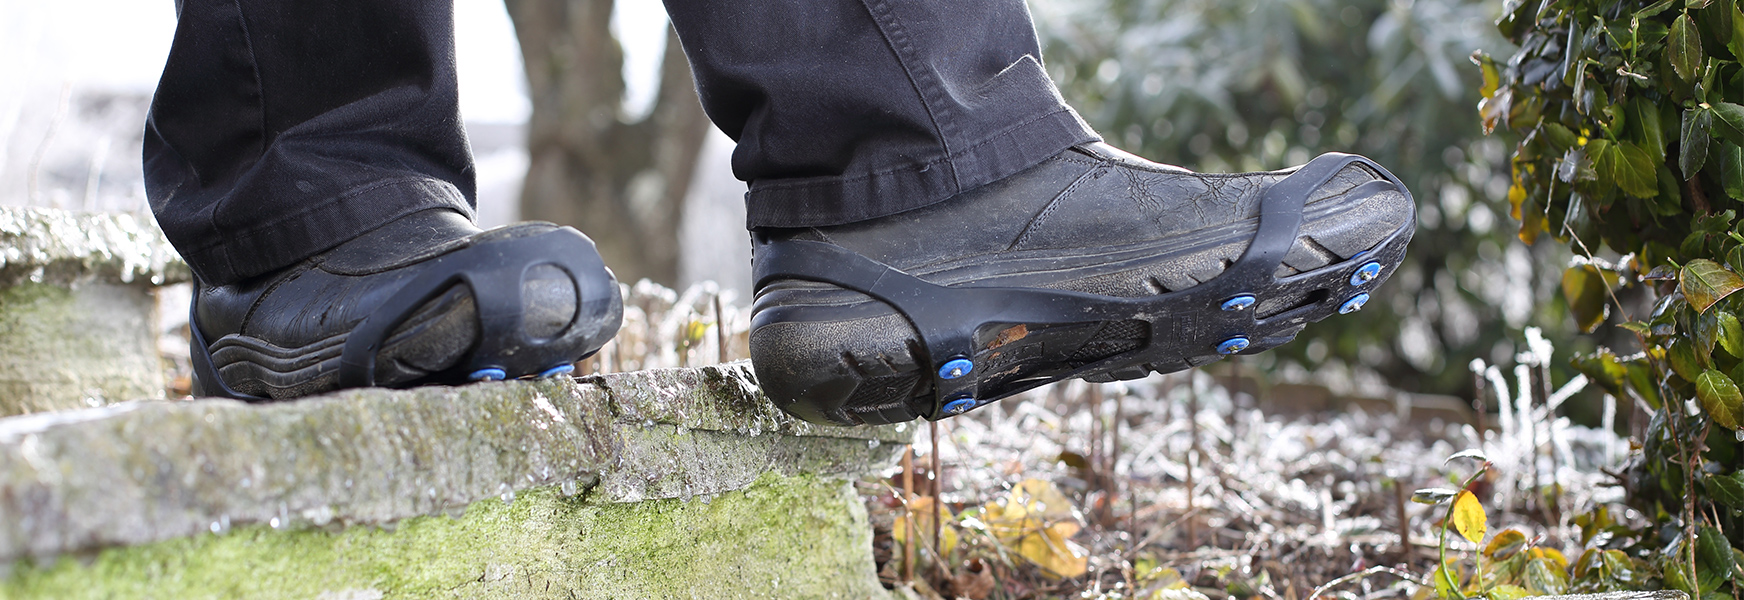 Boots equipped with traction enhancers.